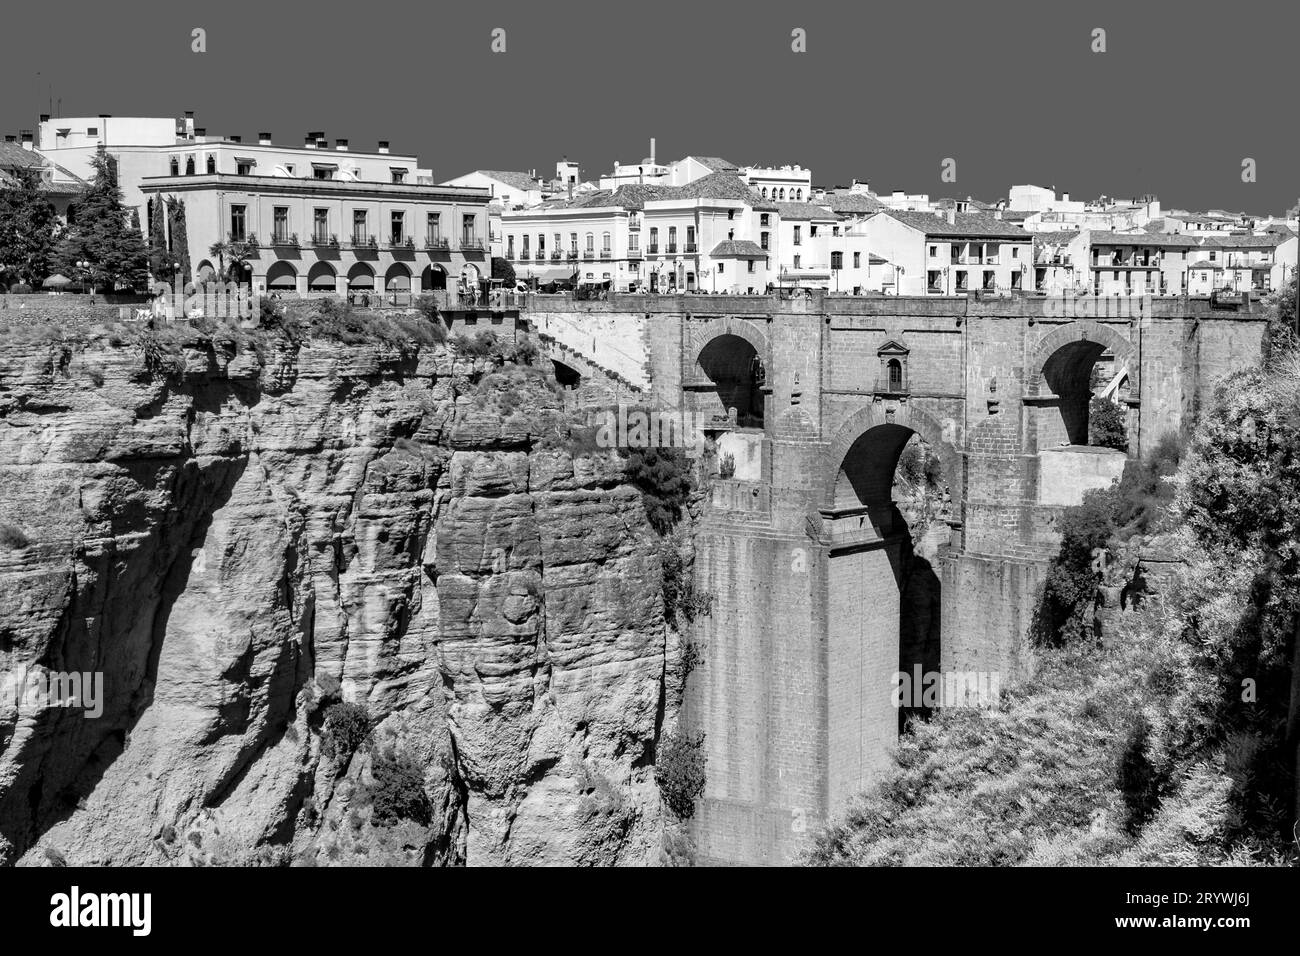 Picturesque view of The Puente Nuevo bridge over a rocky canyon dividing the city of Ronda in Andalusia province. Stock Photo